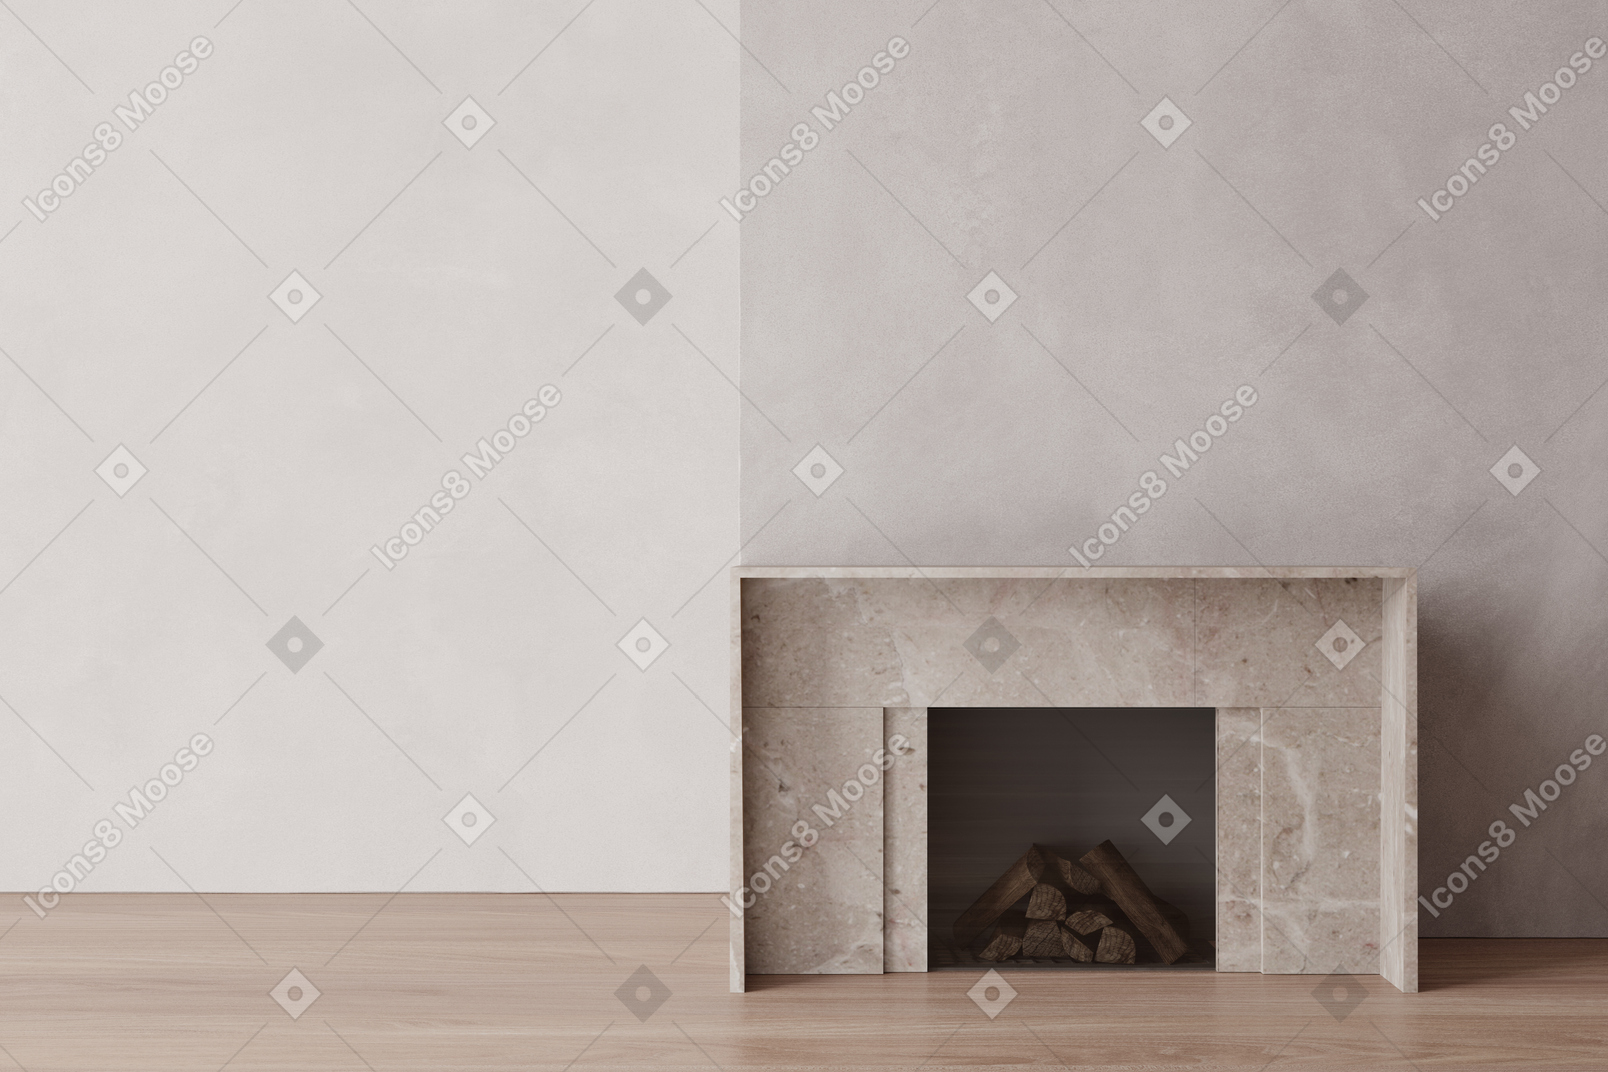 Empty room with fireplace filled with firewood